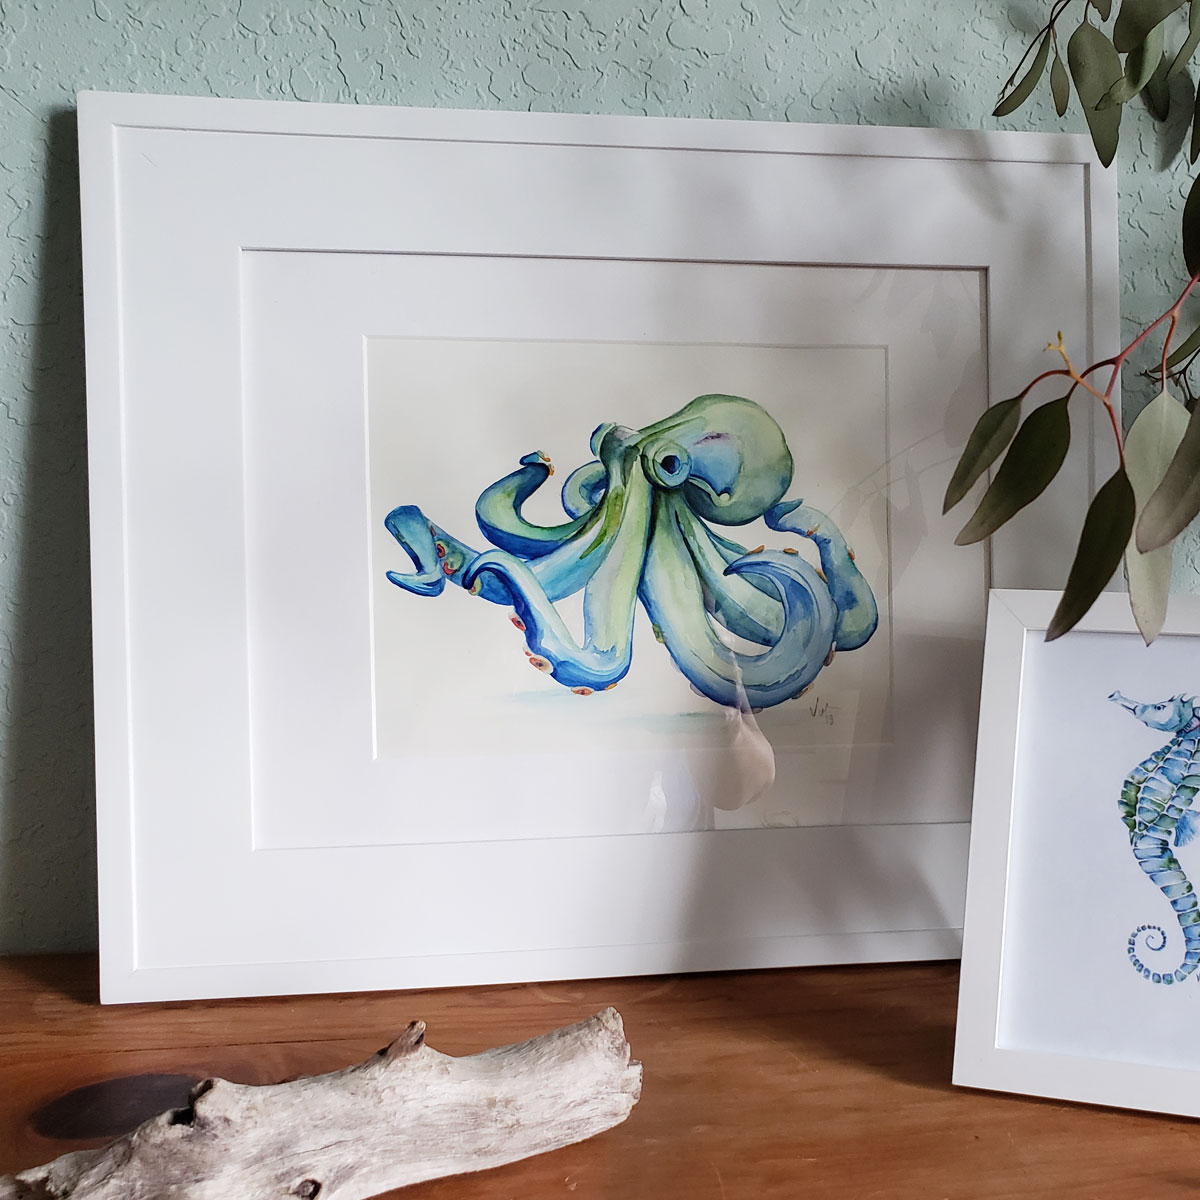 Watercolor Blue Octopus by Victoria Grigaliunas was accepted to the APBC Summer Dreams Juried Exhibit.